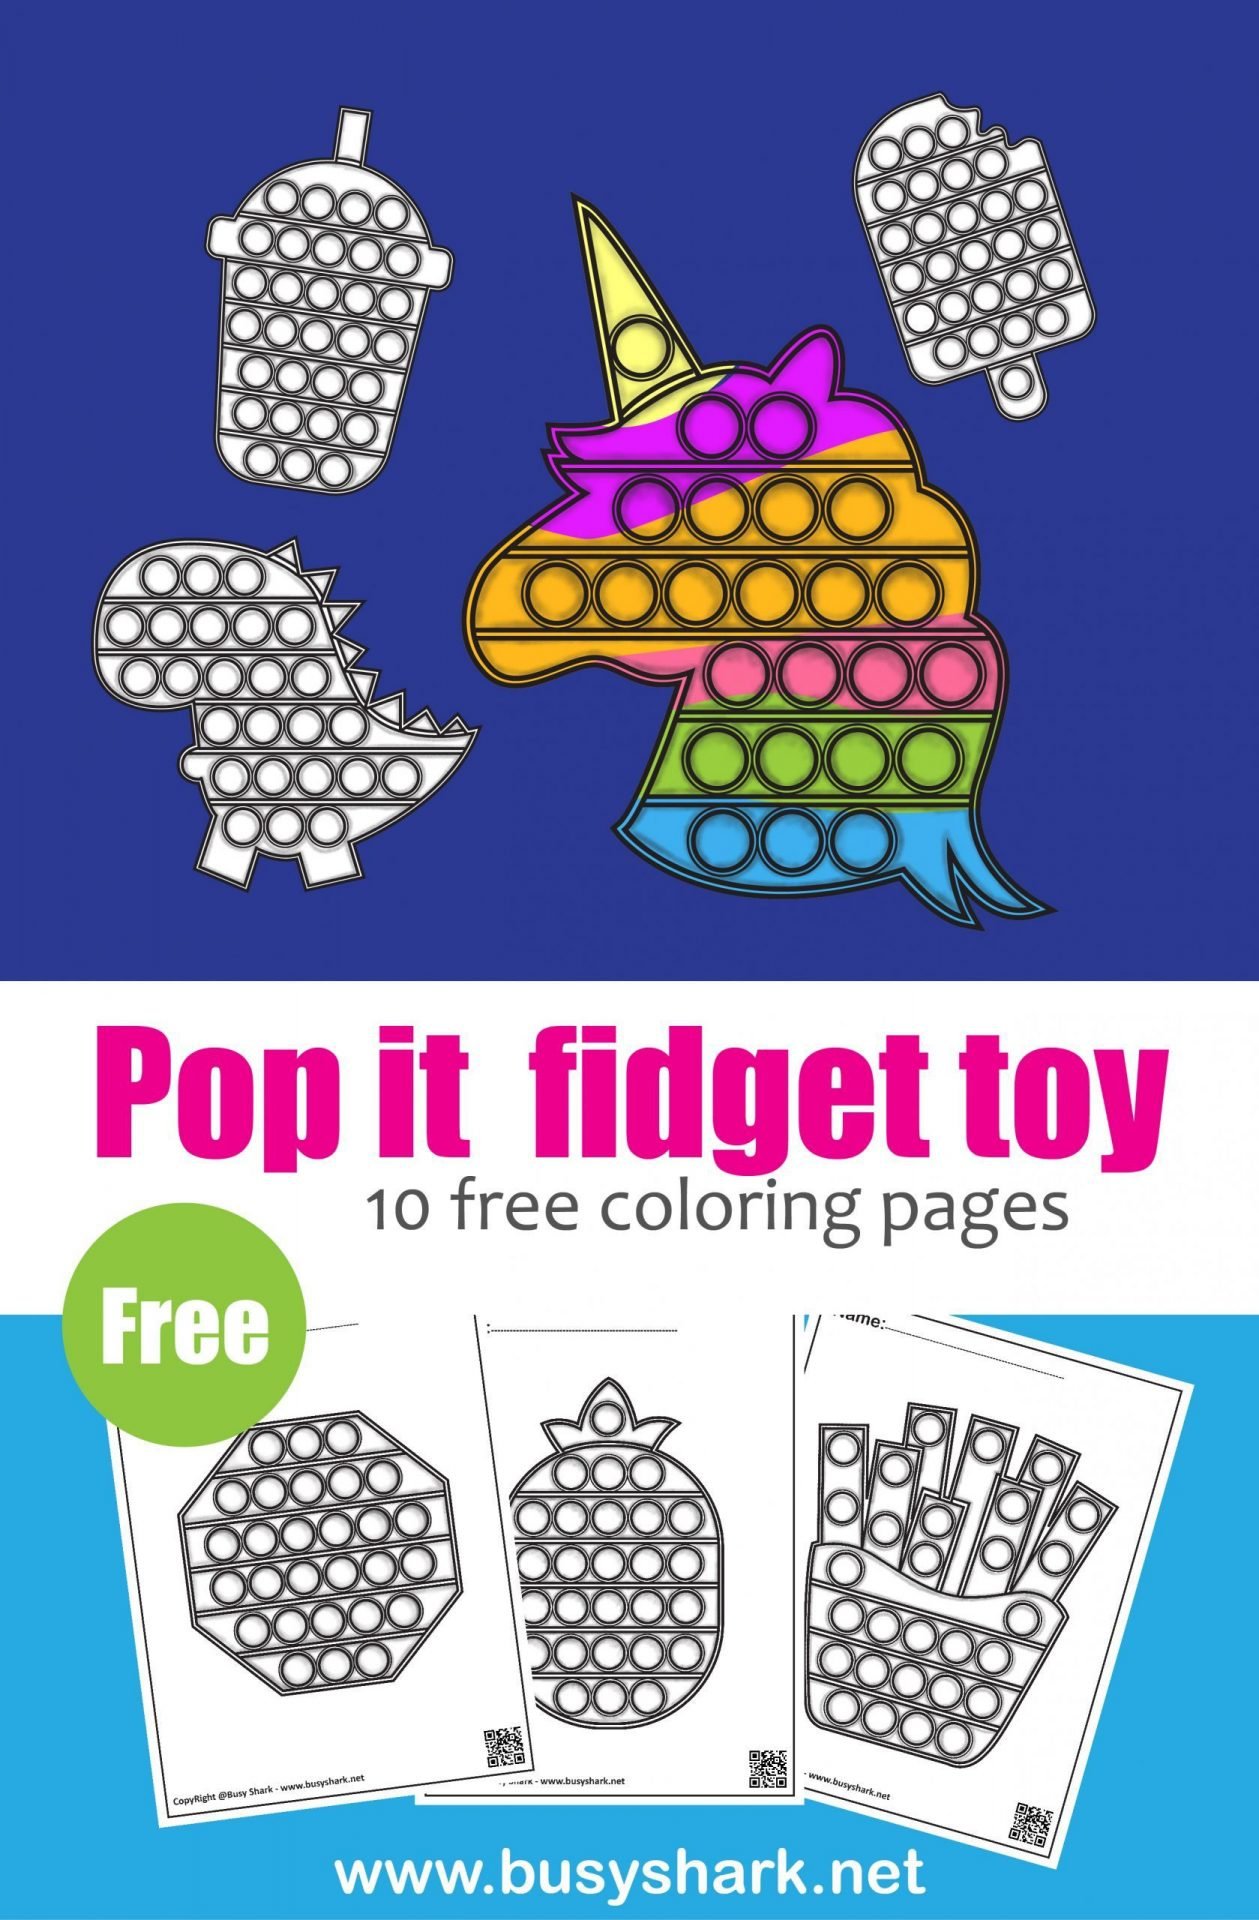 Pop it fidget toy free printable coloring pages